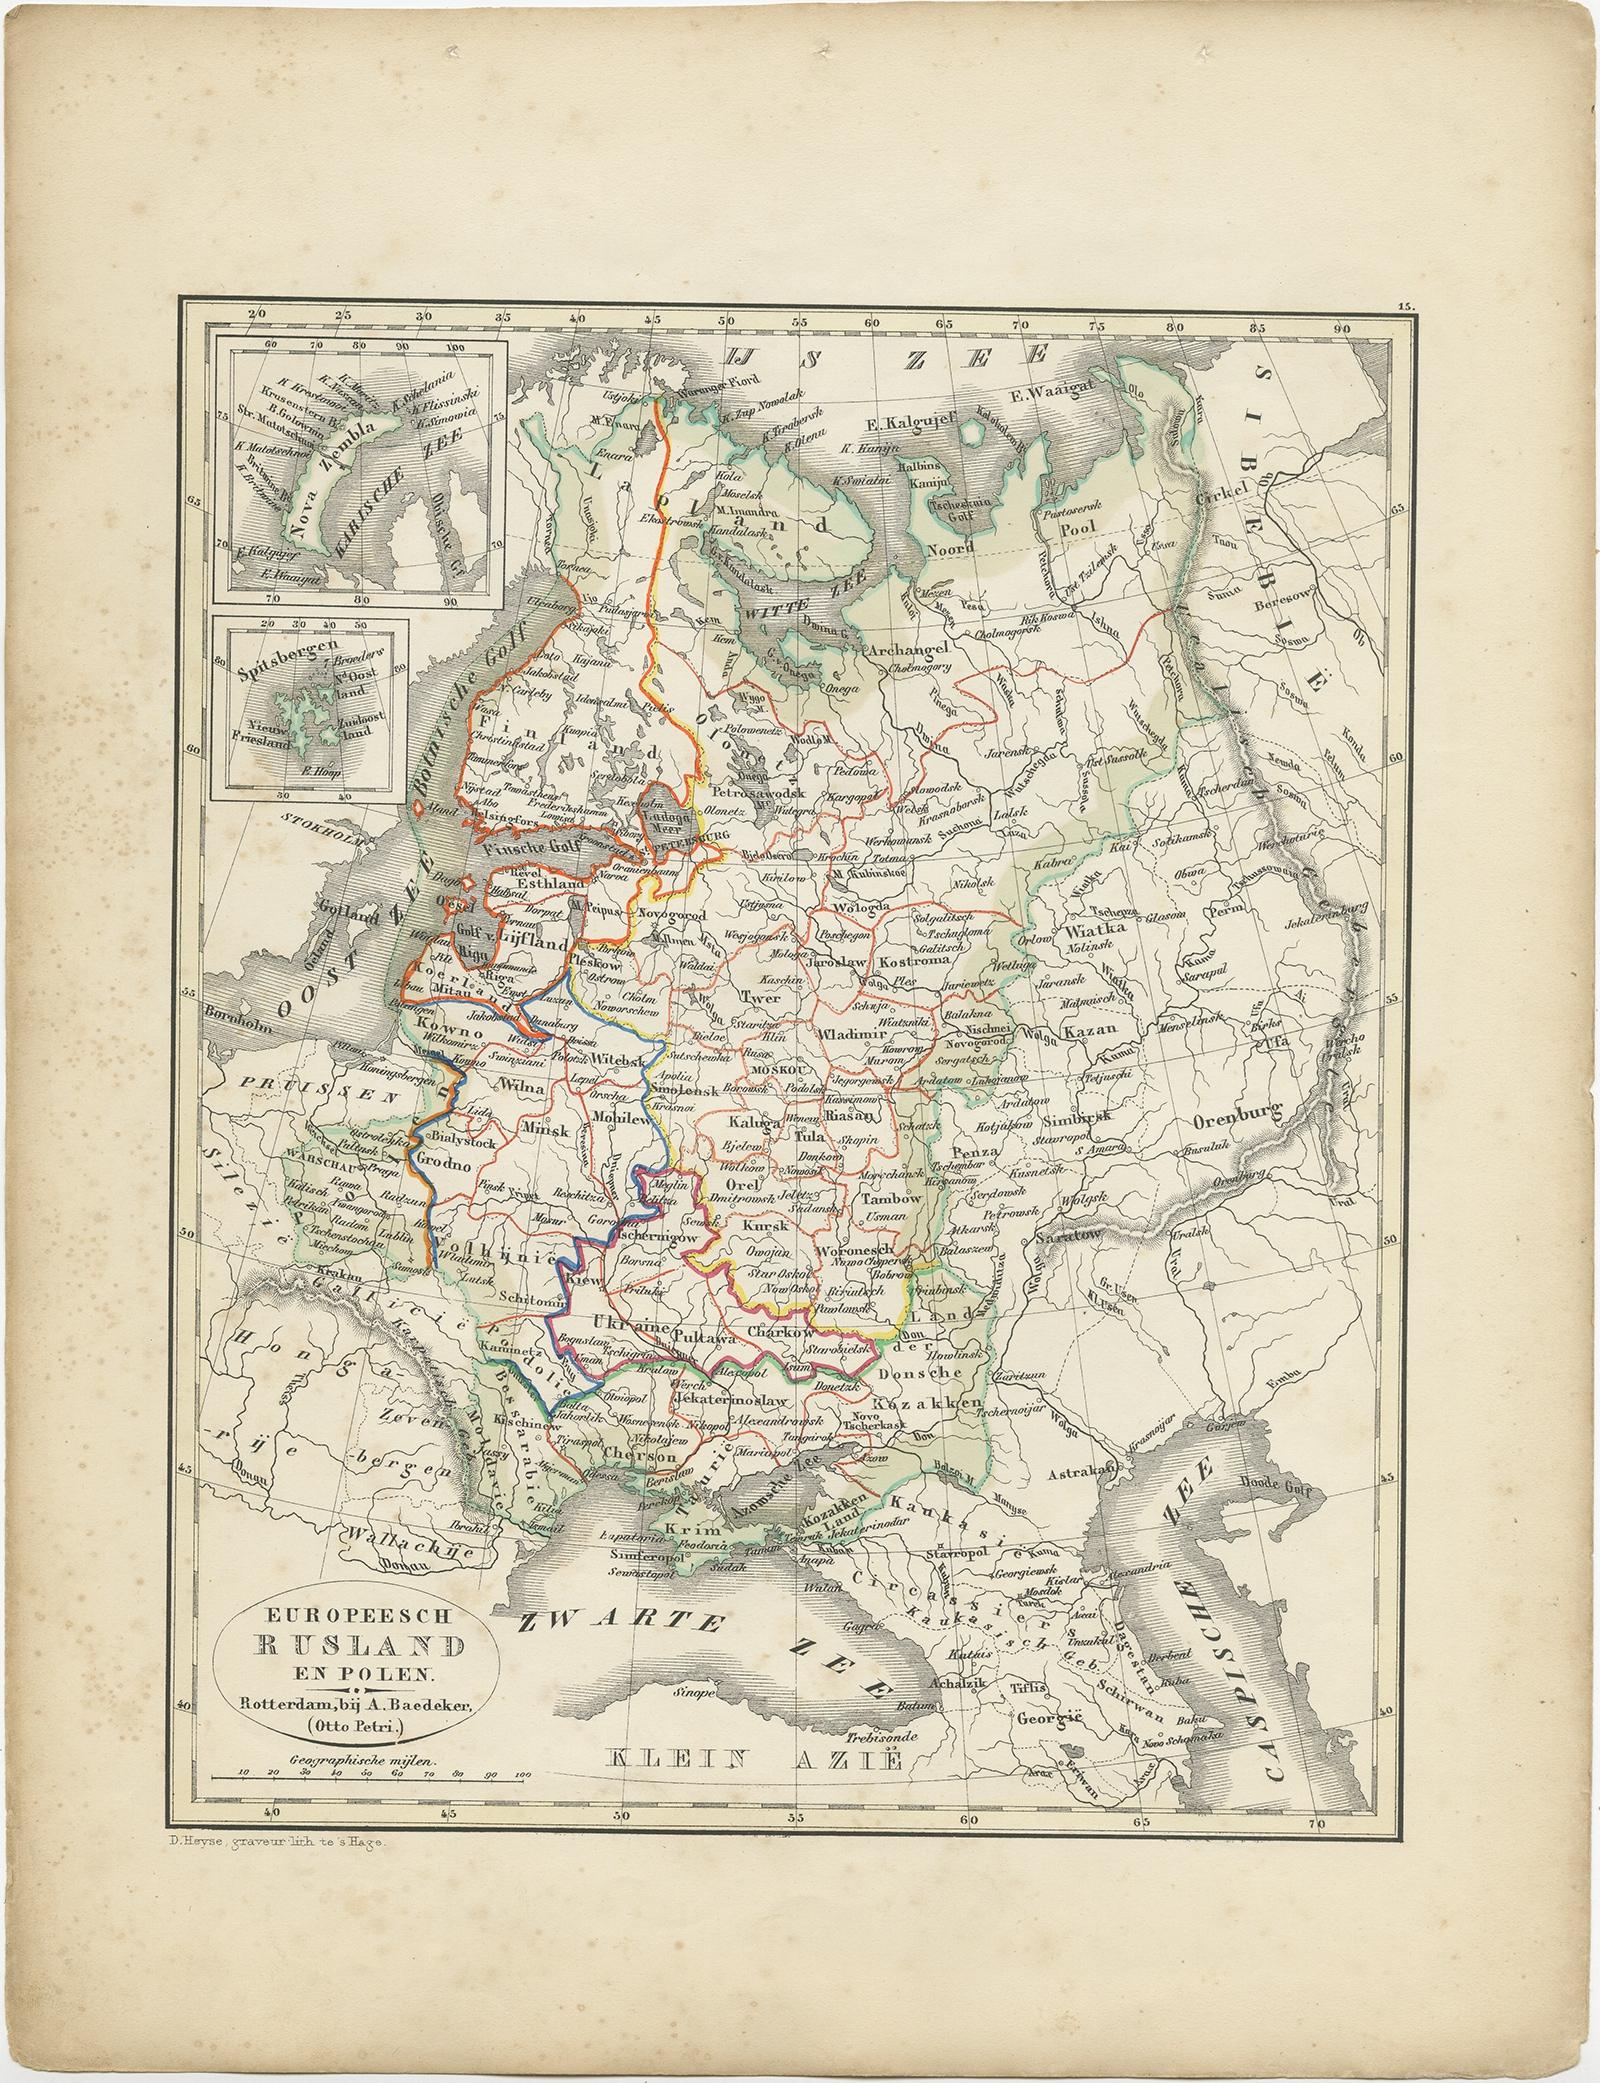 Description: Antique map titled 'Europeesch Rusland en Polen'. 

Map of Russia in Europe and Poland. This map originates from 'School-Atlas van alle deelen der Aarde' by Otto Petri. 

Artists and Engravers: Published by A. Baedeker (Otto Petri).